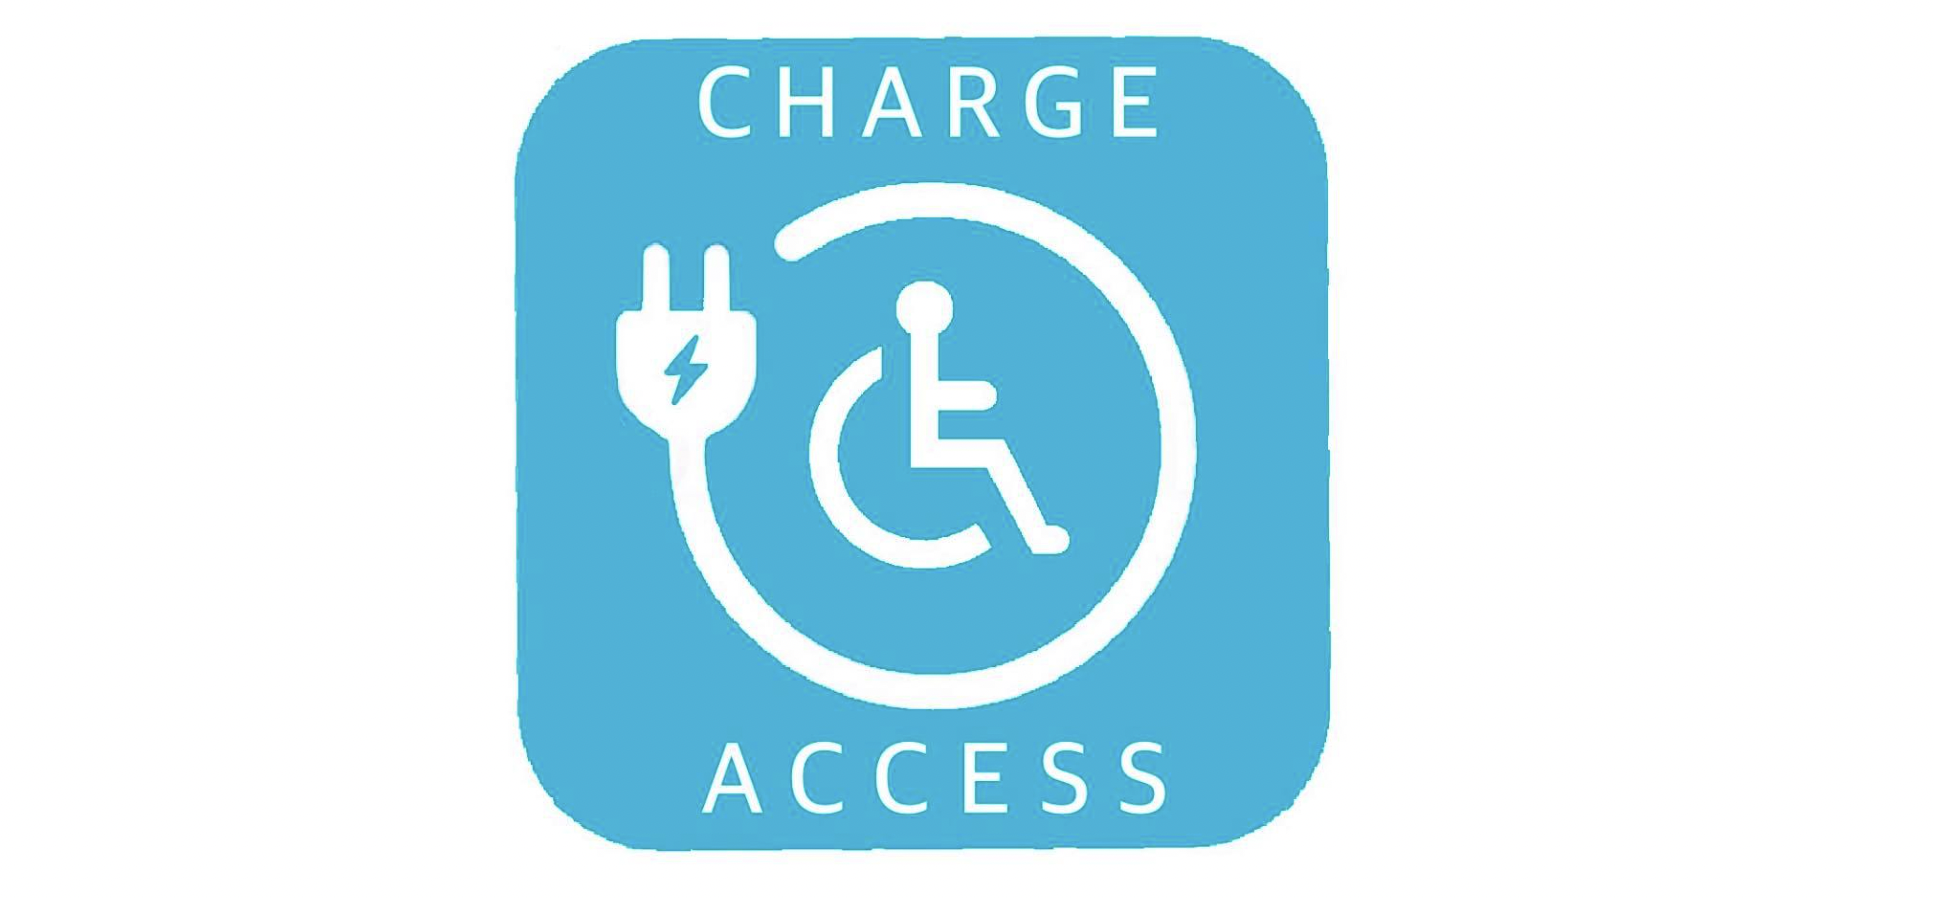 Charge access